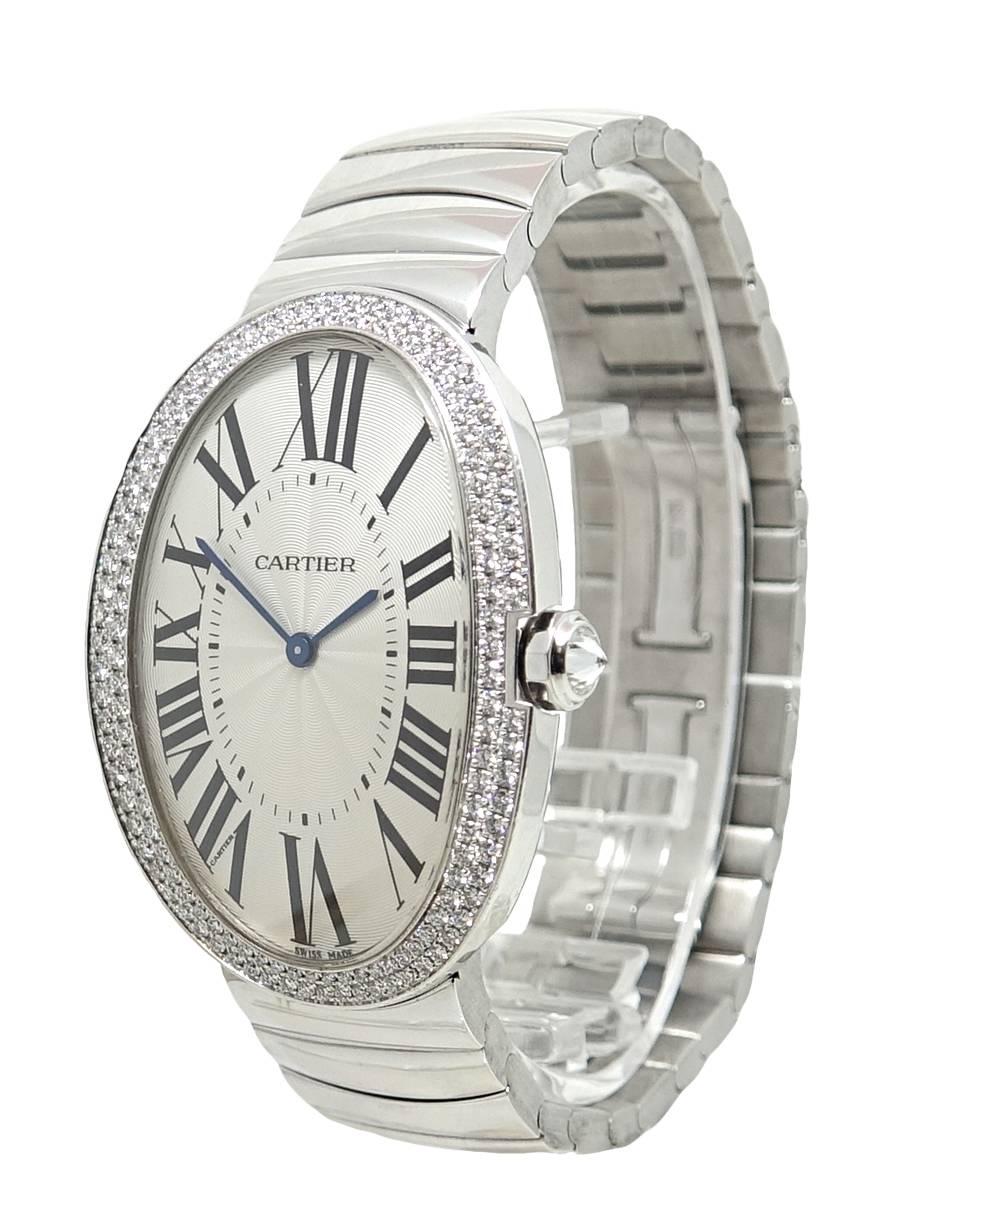 This Classic Cartier Baignoire Watch is 18K White Gold With A Mechanical Quartz Movement and A  Case Size. A Double Row Of Diamonds Along The Bezel Add Sparkle To This Beautiful Cartier. The Size Of This Case Is 44 x 34mm With A Case Thickness Of